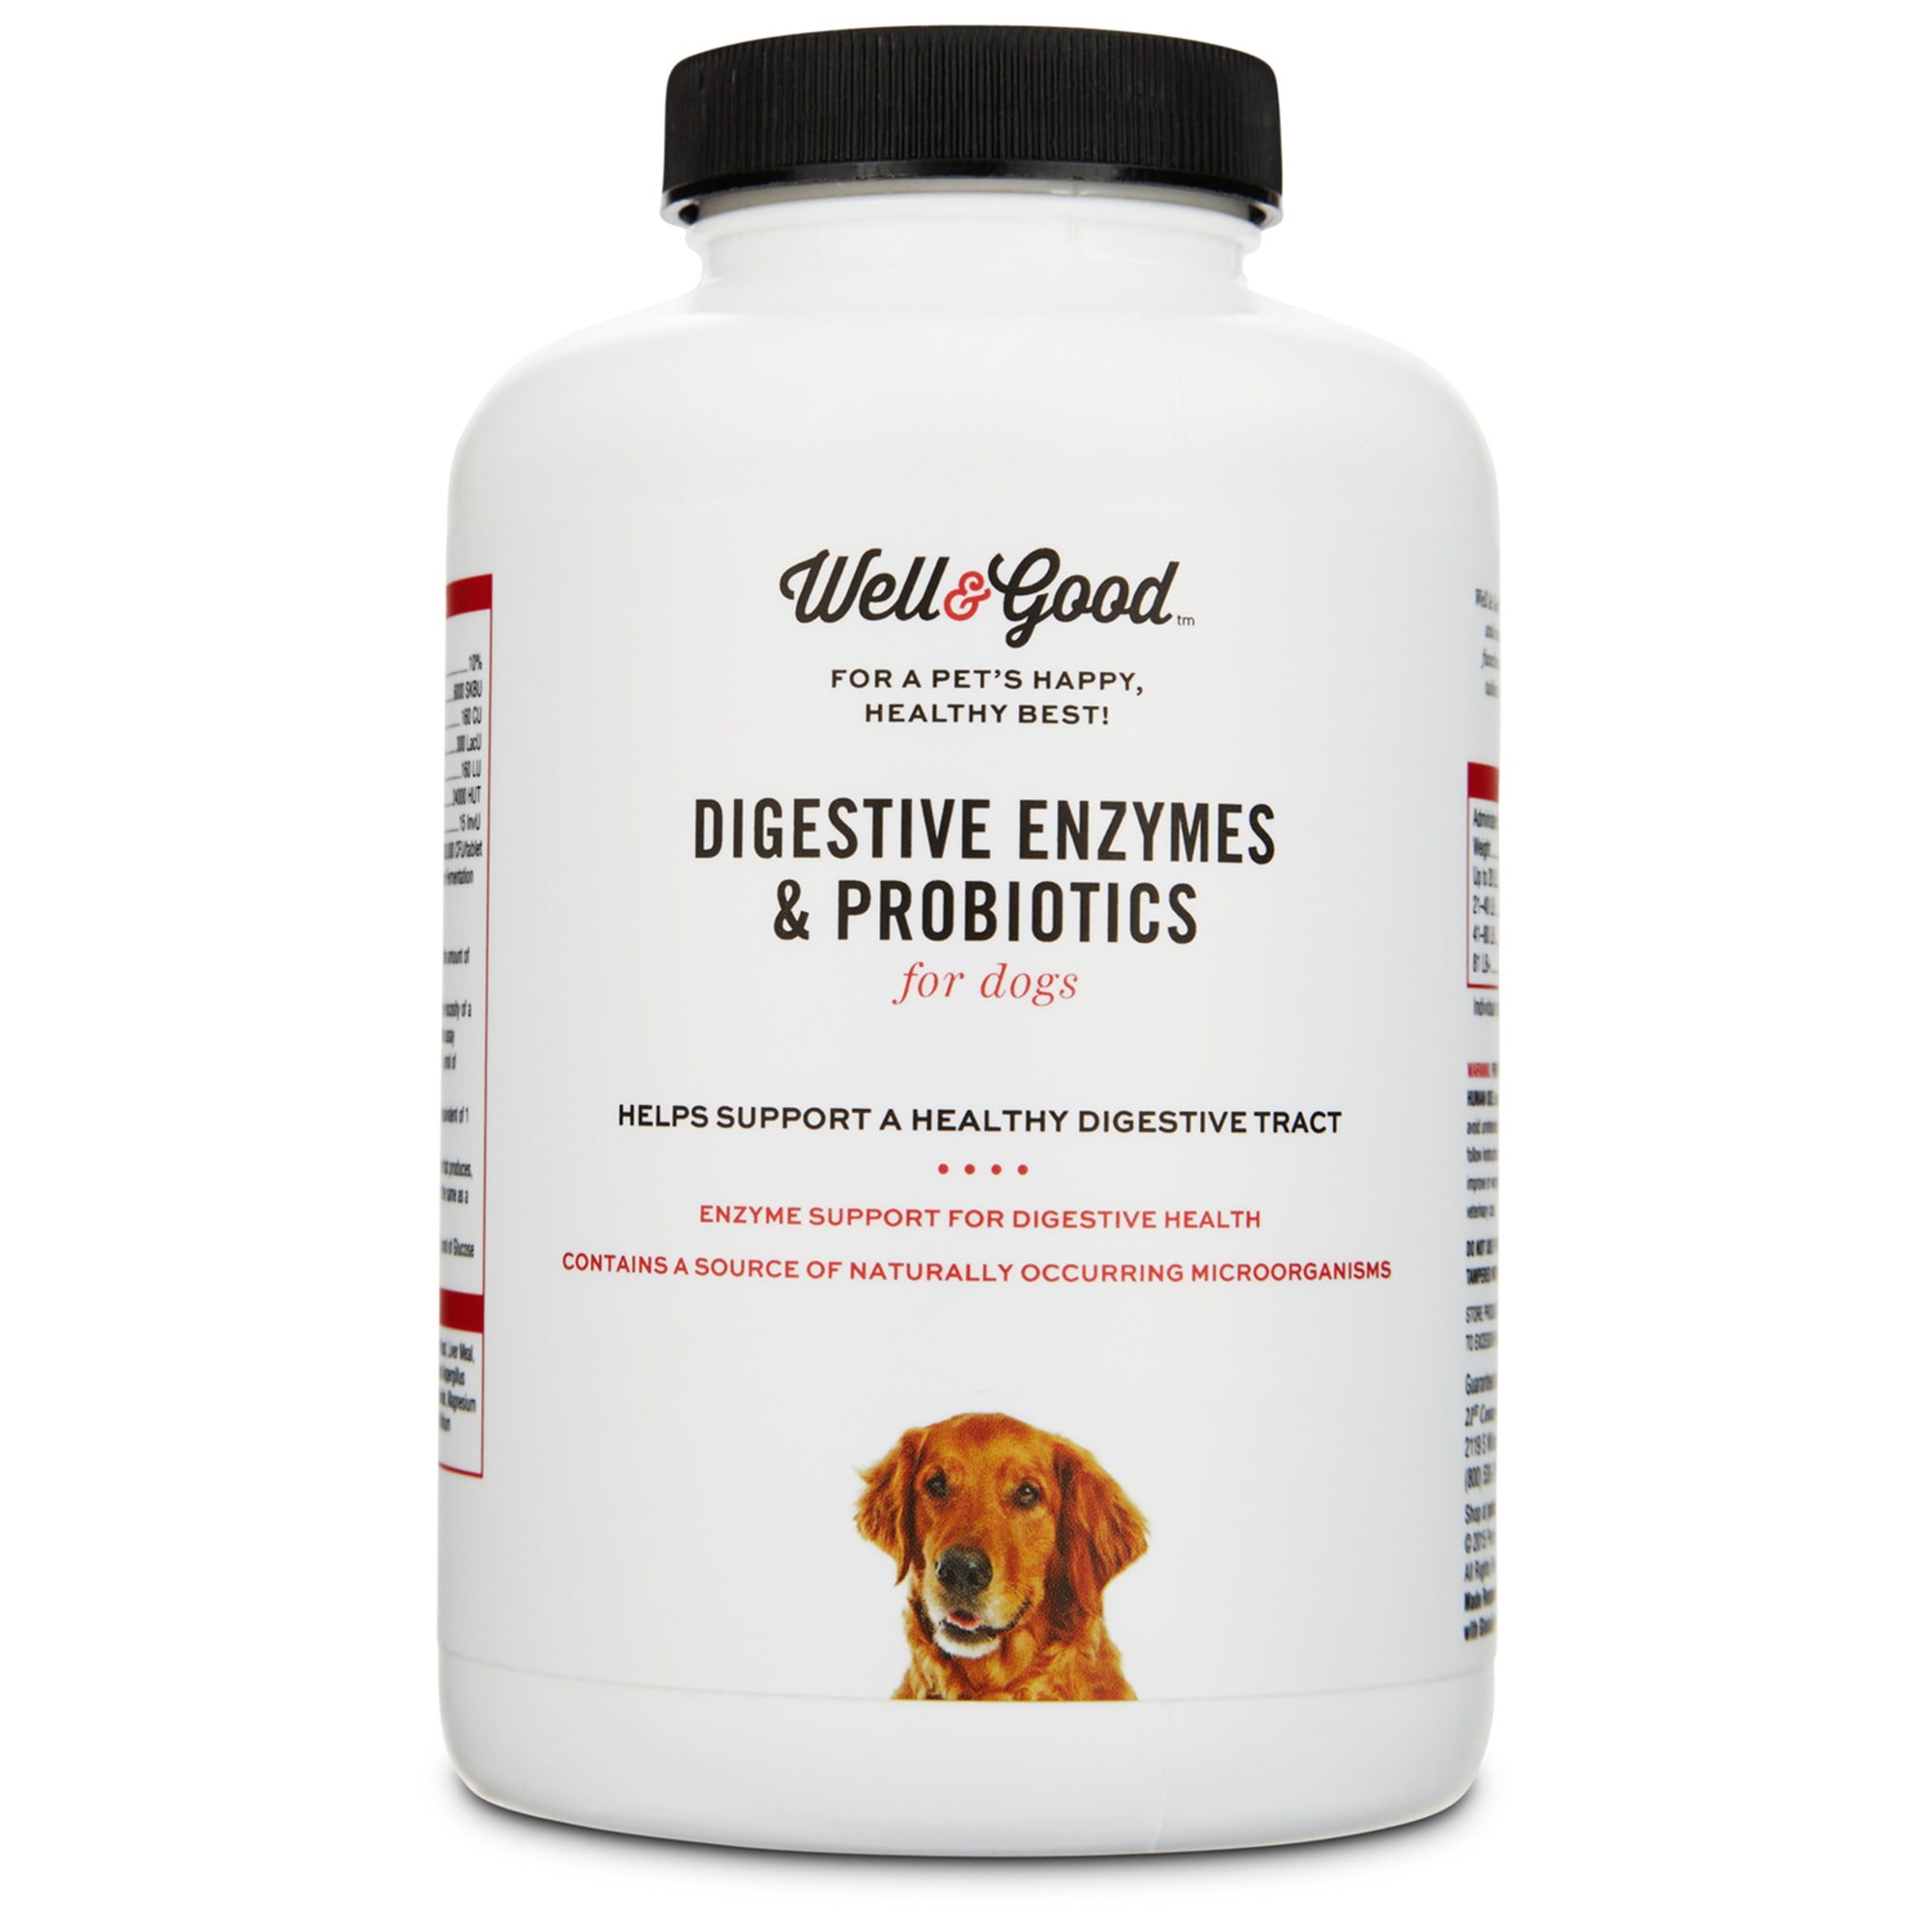 my healthy pet probiotics and enzymes